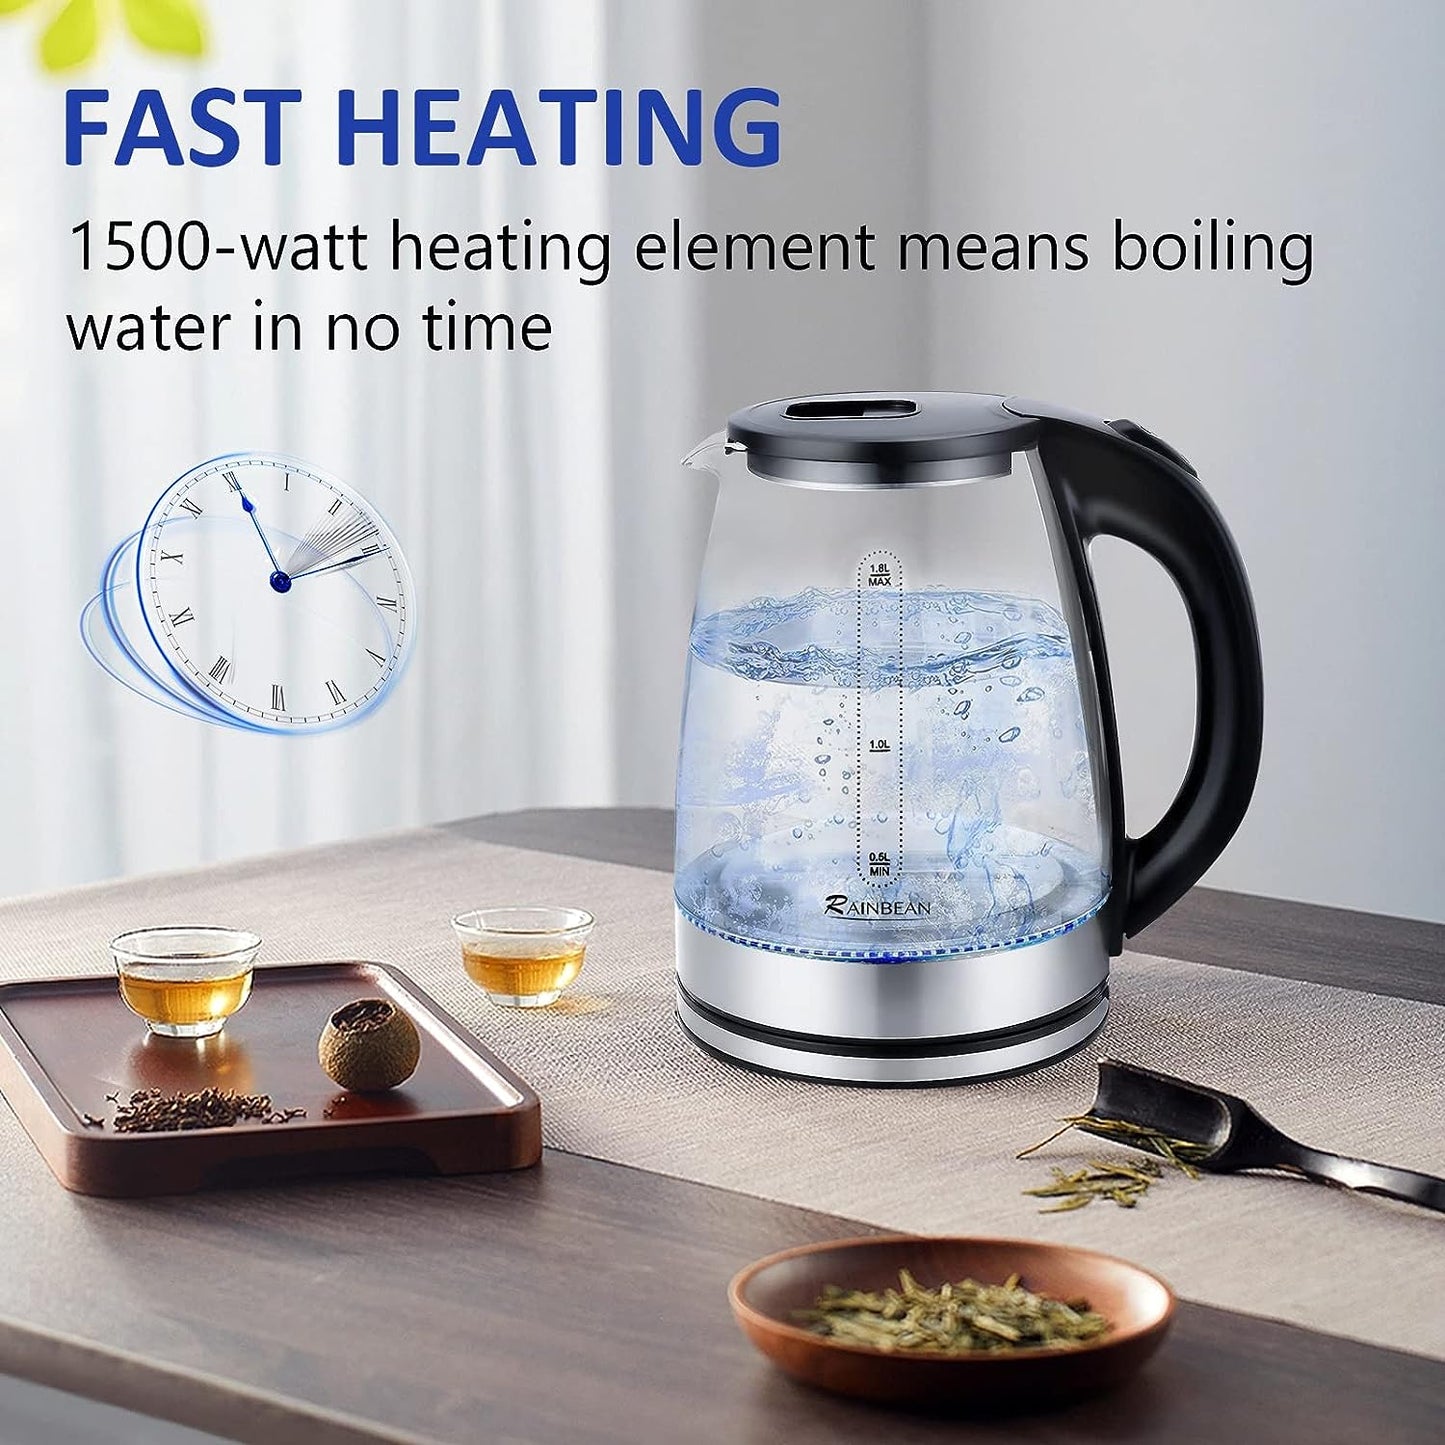 Electric Kettle Water Boiler, 1.8L Electric Tea Kettle, Wide Opening Hot Water Boiler With LED Light, Auto Shut-Off & Boil Dry Protection, Glass Black